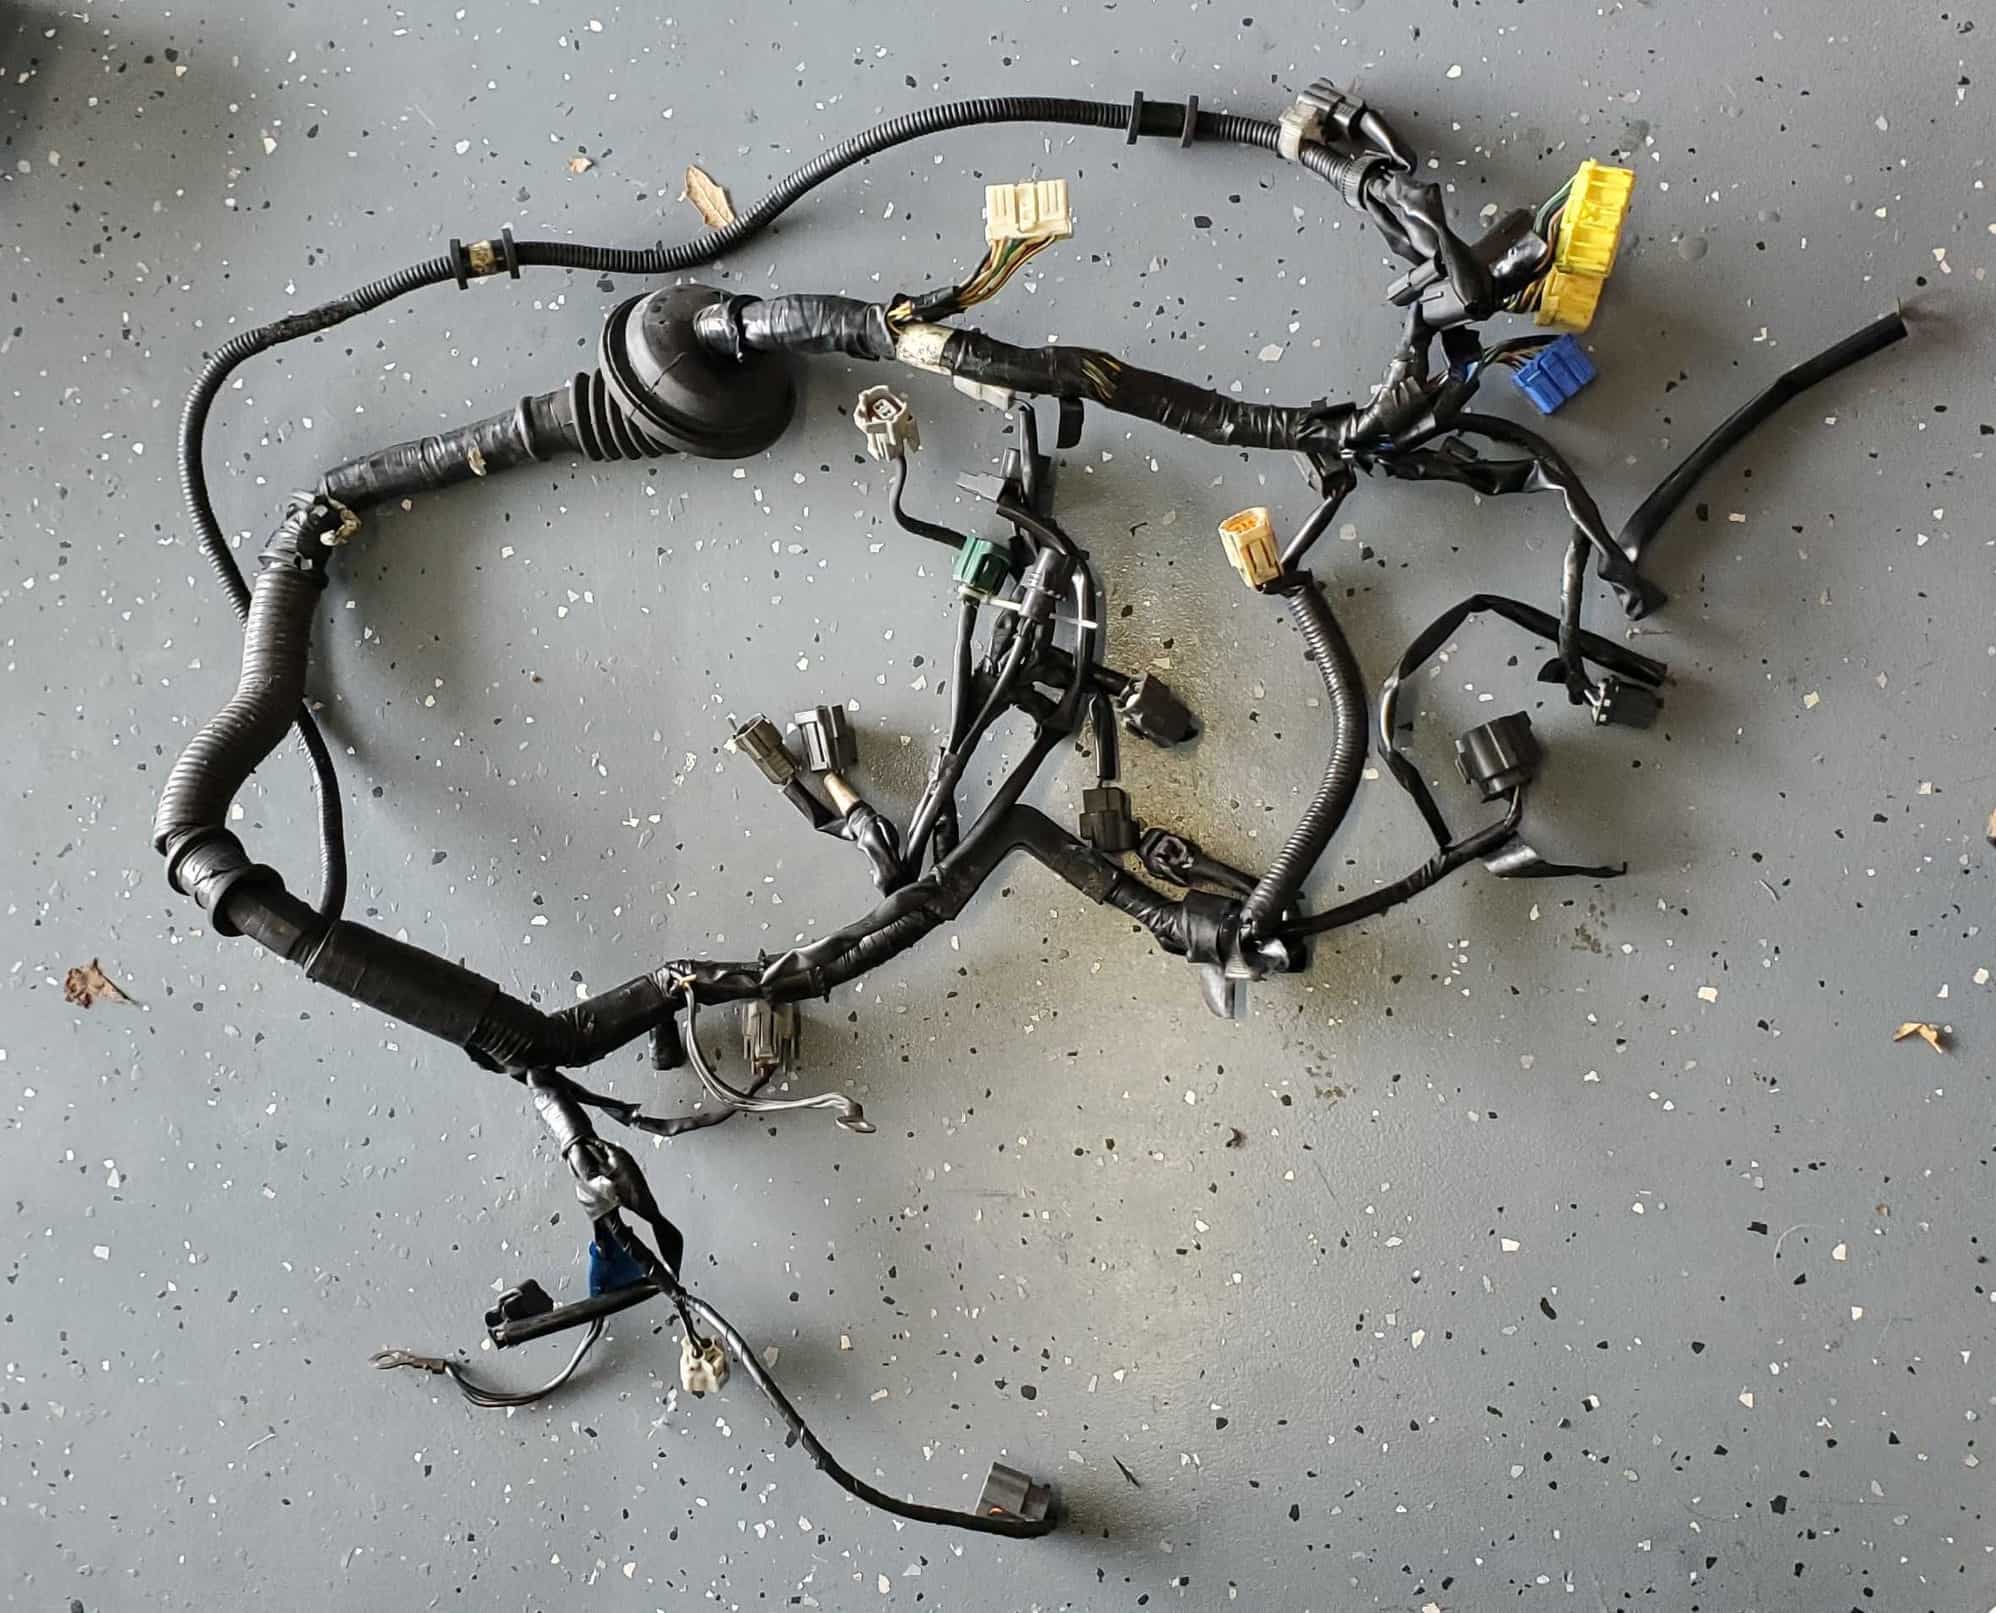 Engine - Electrical - FD OEM engine wiring harness - Used - 1993 to 1995 Mazda RX-7 - Austin, TX 78610, United States